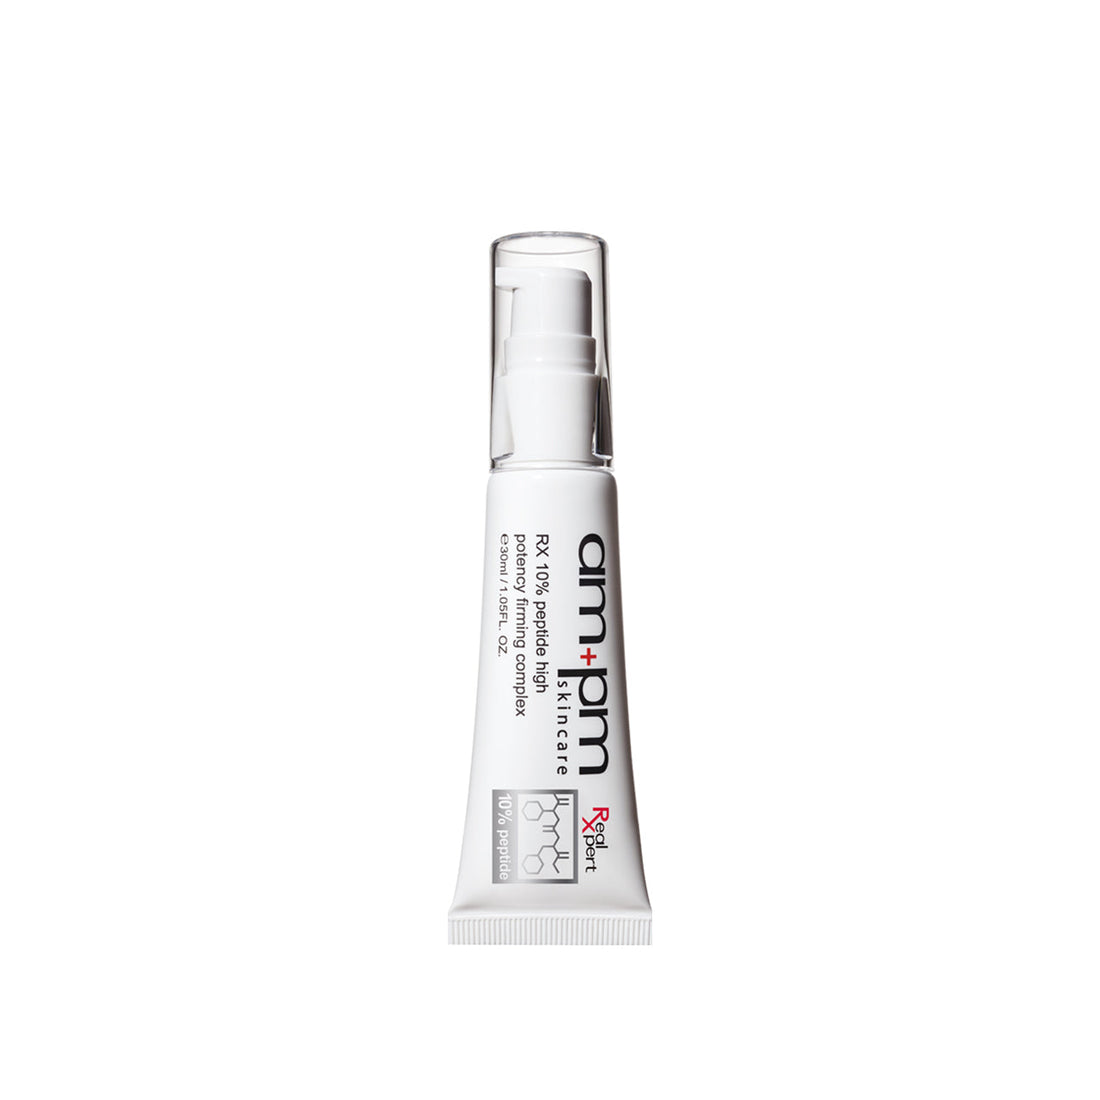 &lt;EXP: 2024-12-08&gt; am+pm RX10 Peptide High Potency Firming Complex